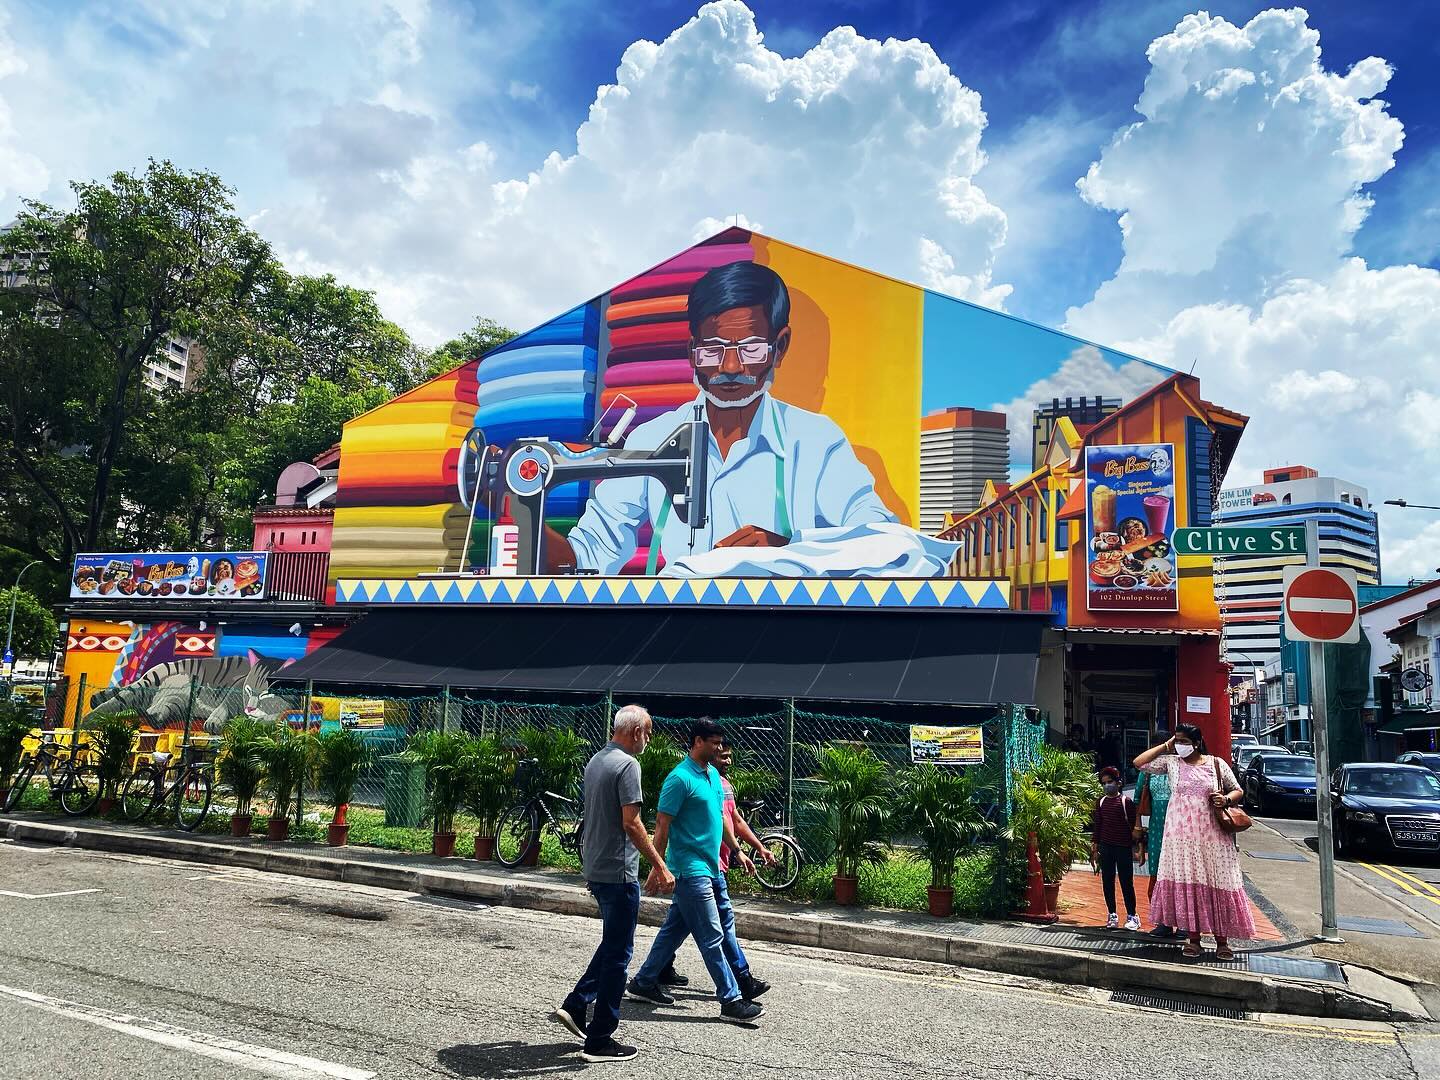 Things to do in Little India - Clive Street art mural